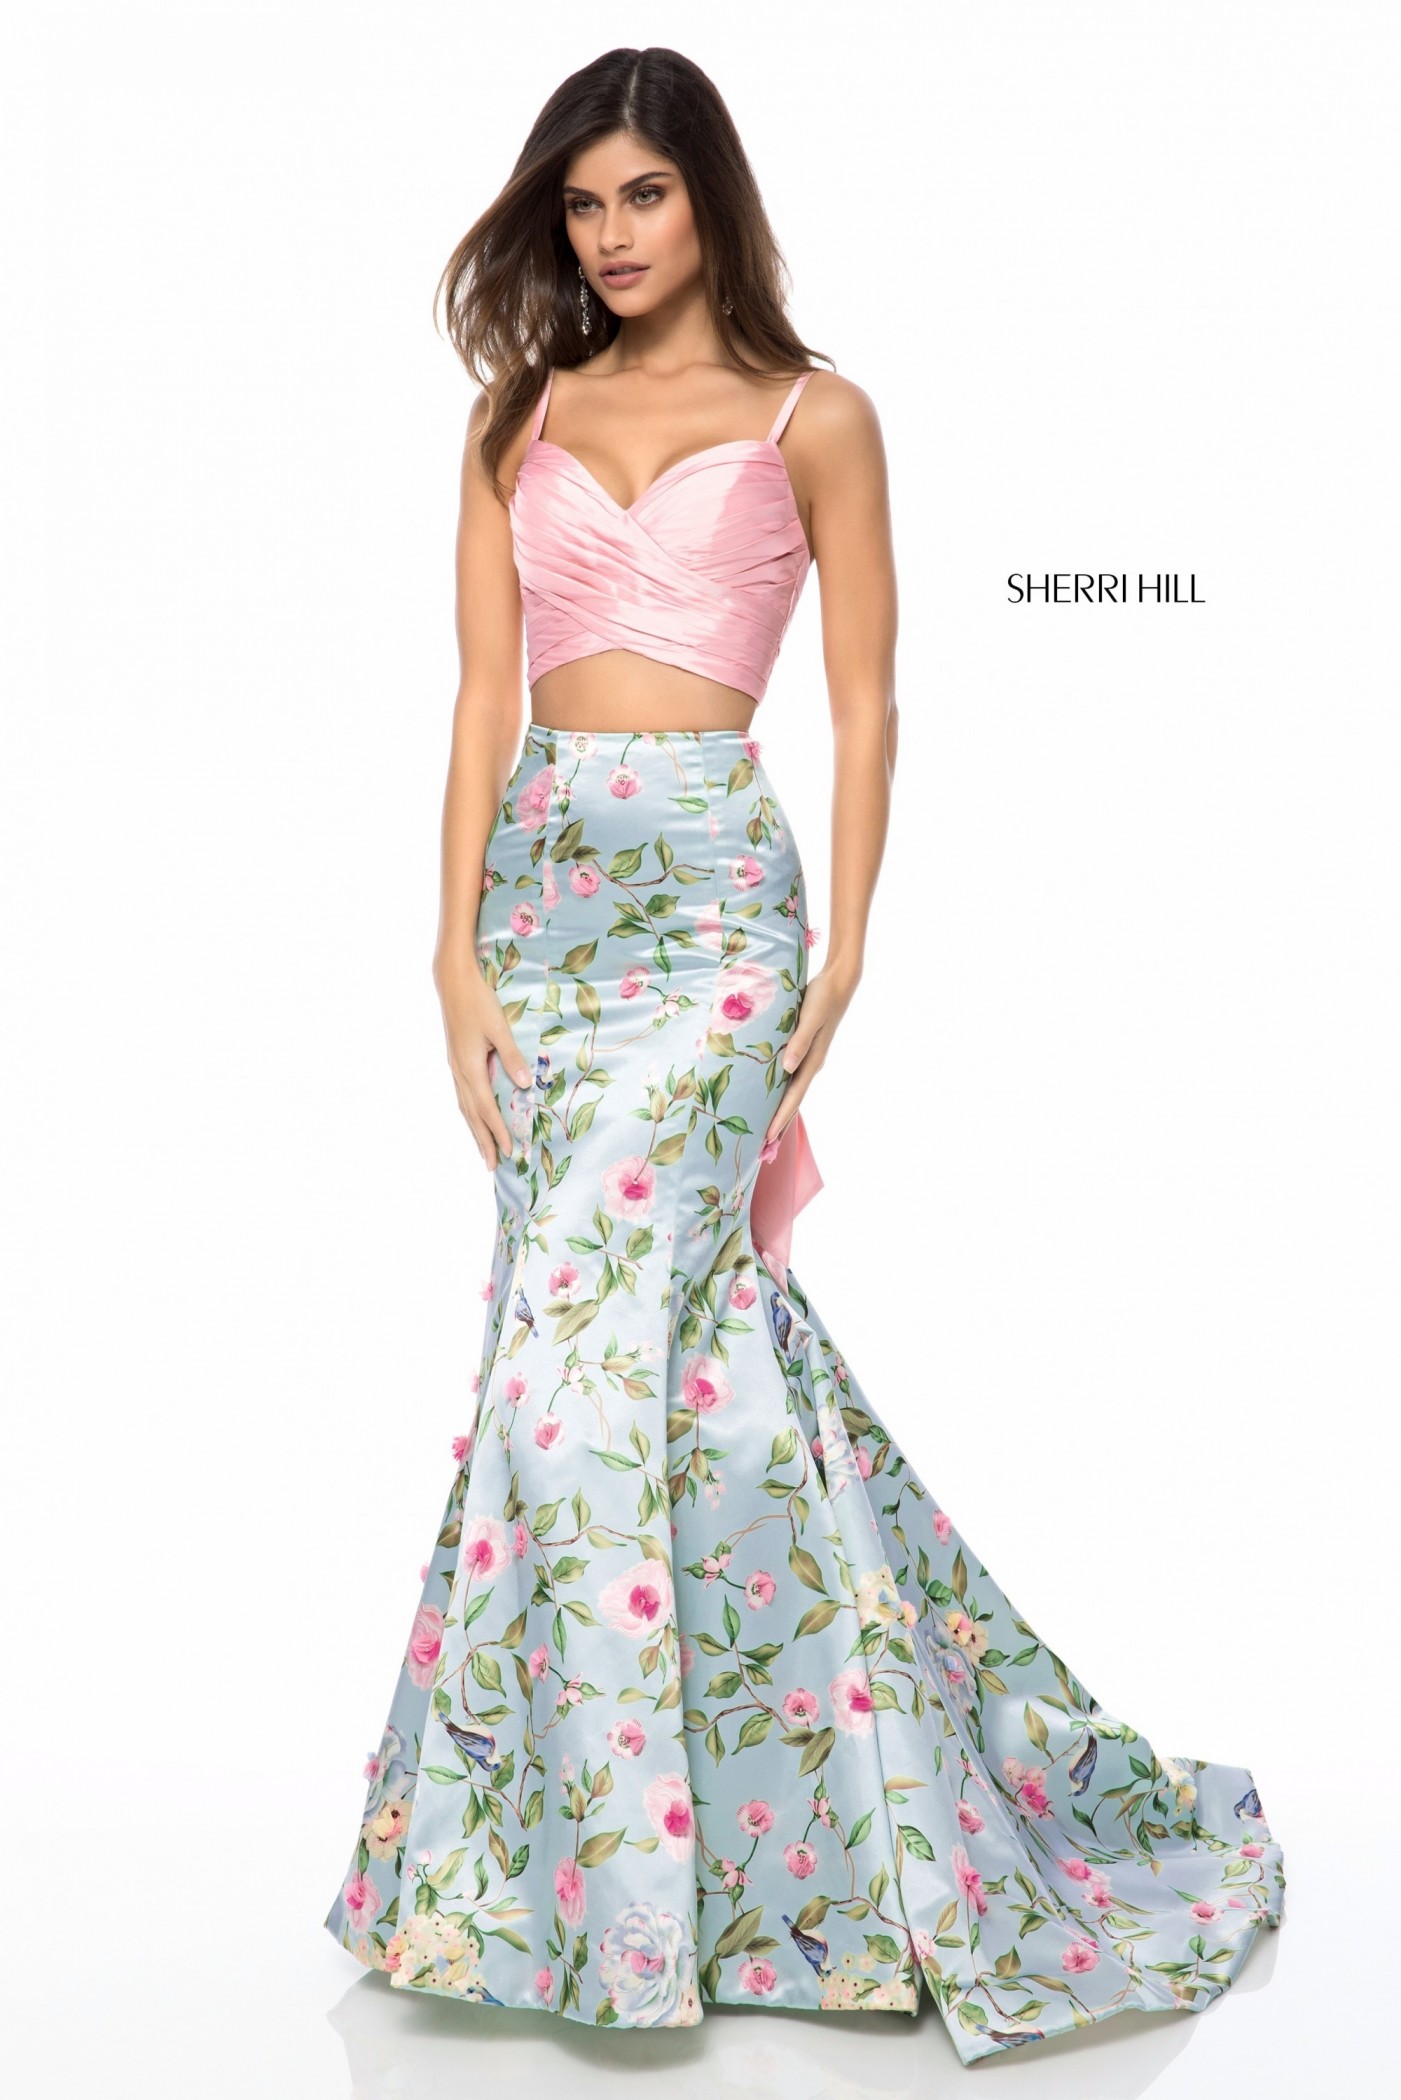 Sherri Hill 51943 Floral Two-Piece Mermaid Gown